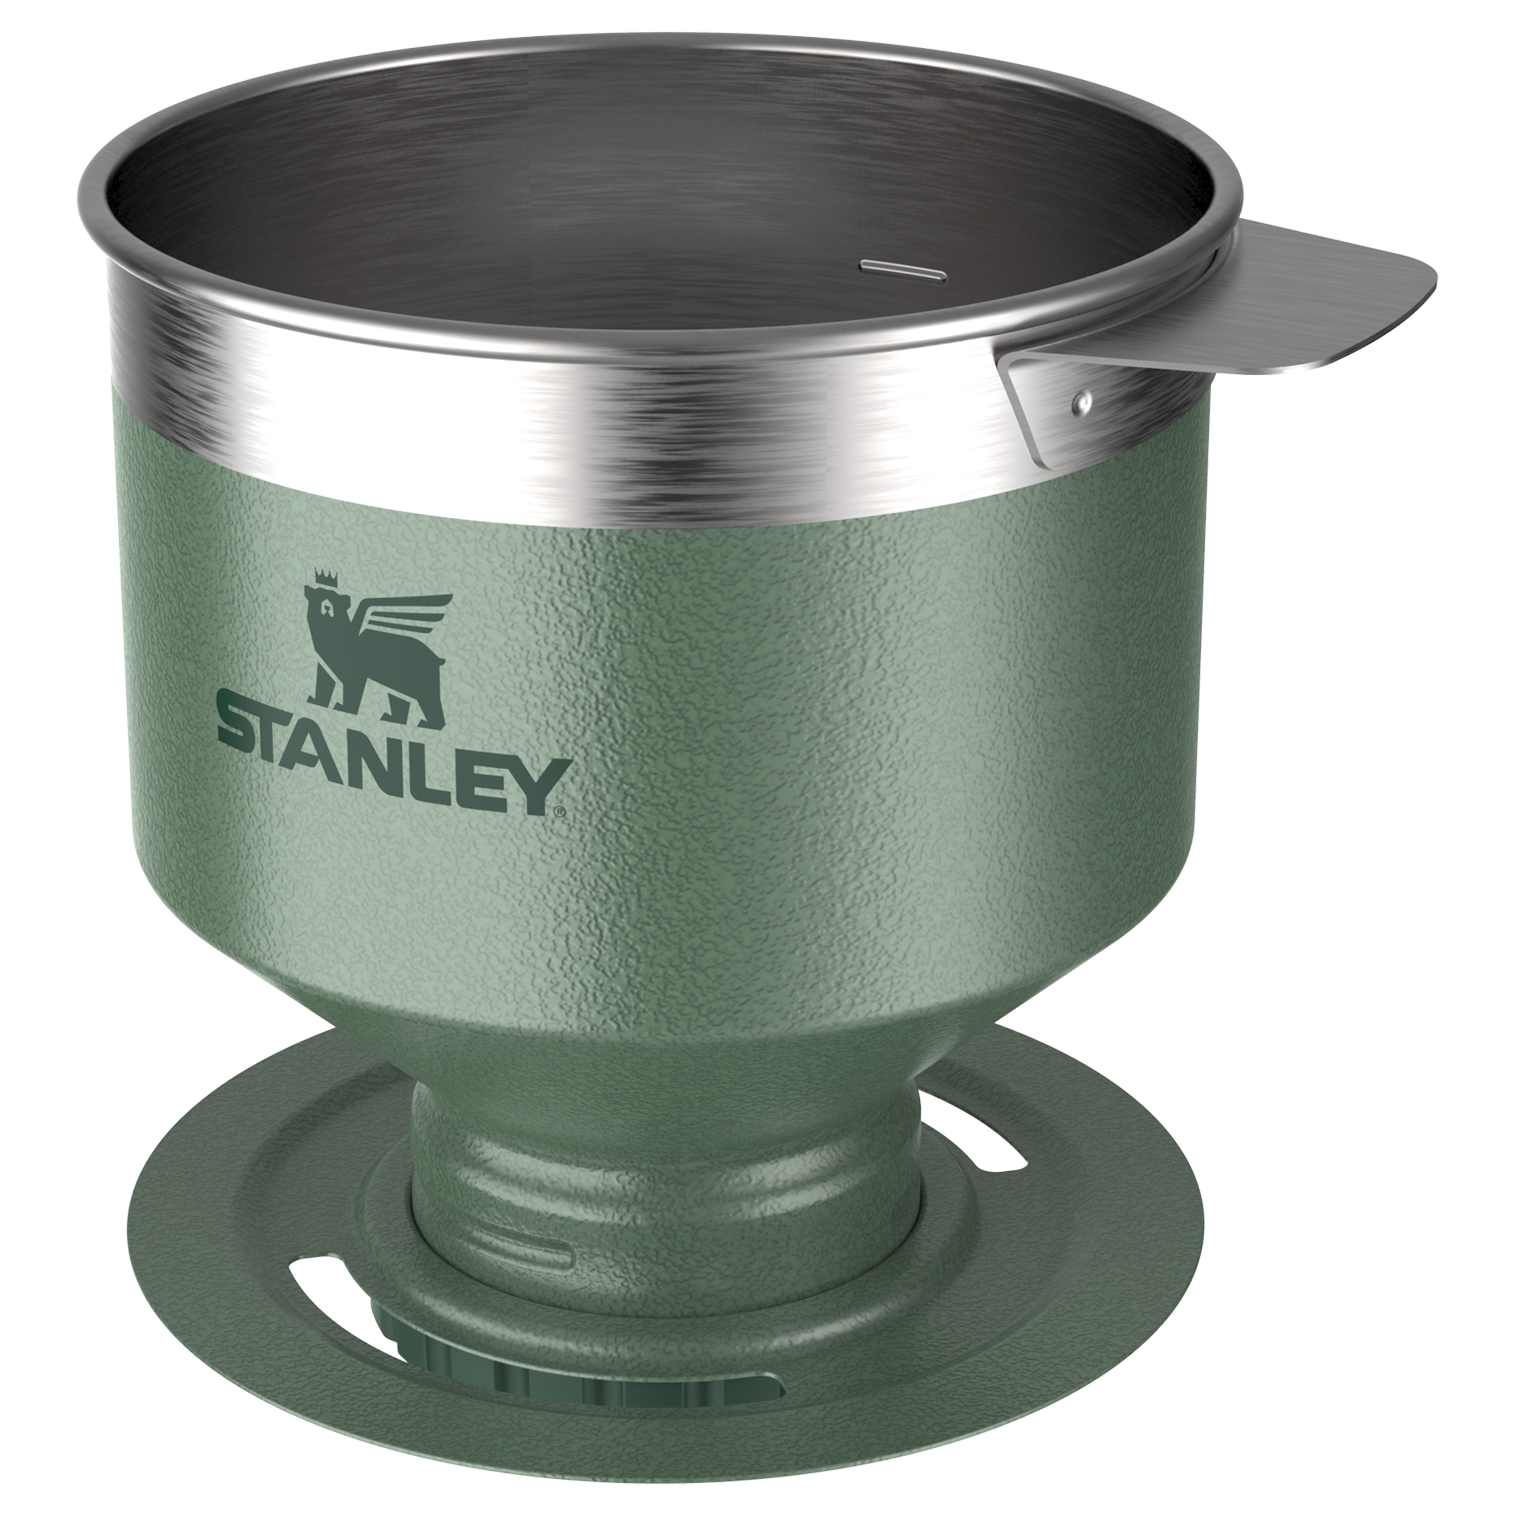 Stanley Classic Perfect-Brew koffiefilter